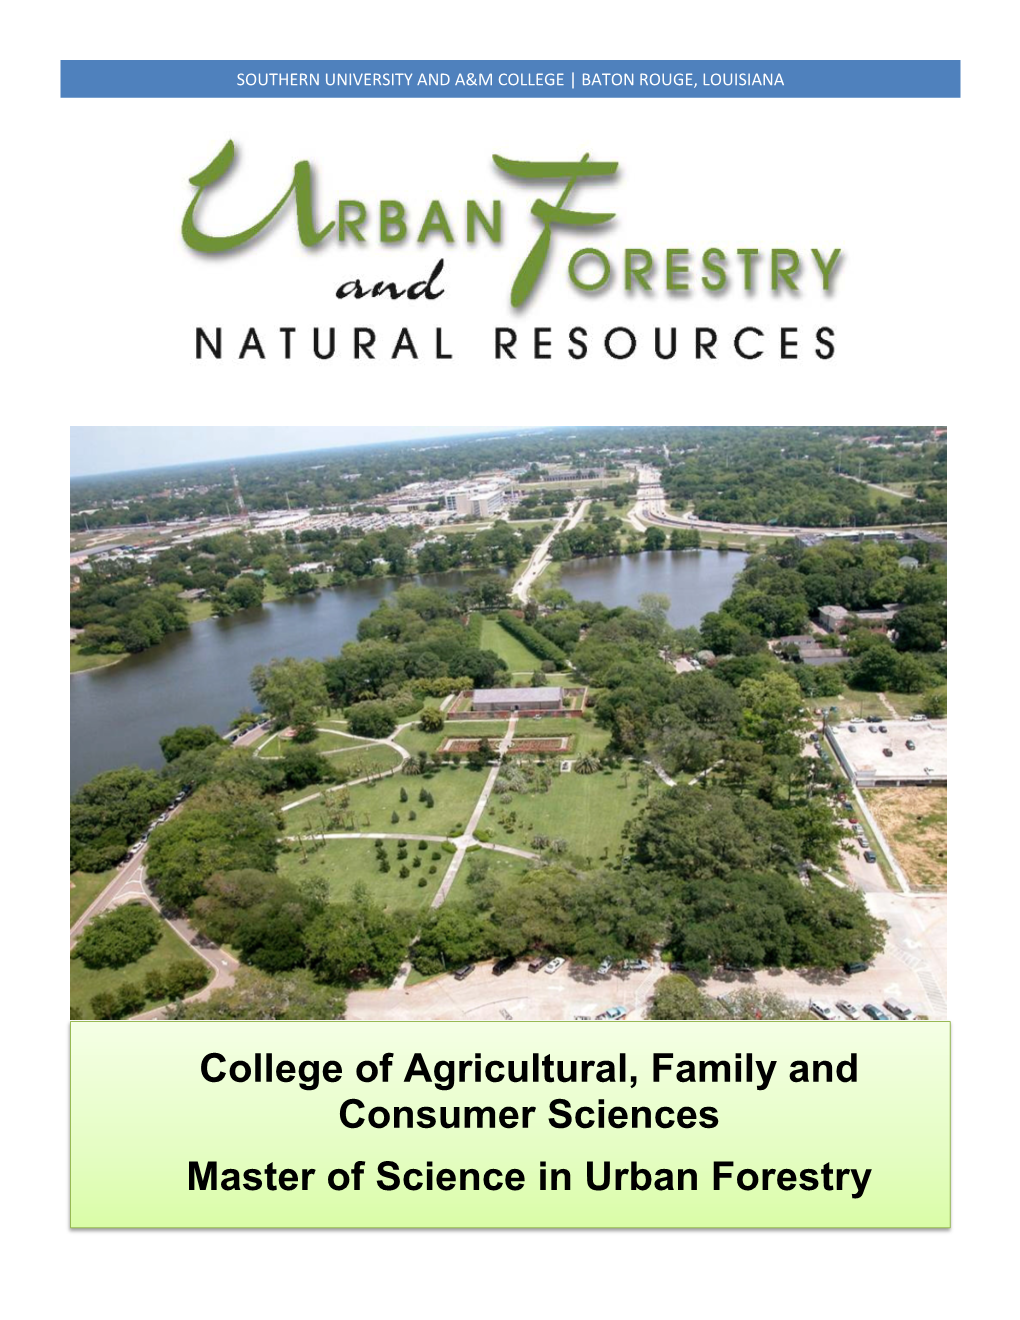 Master of Urban Forestry